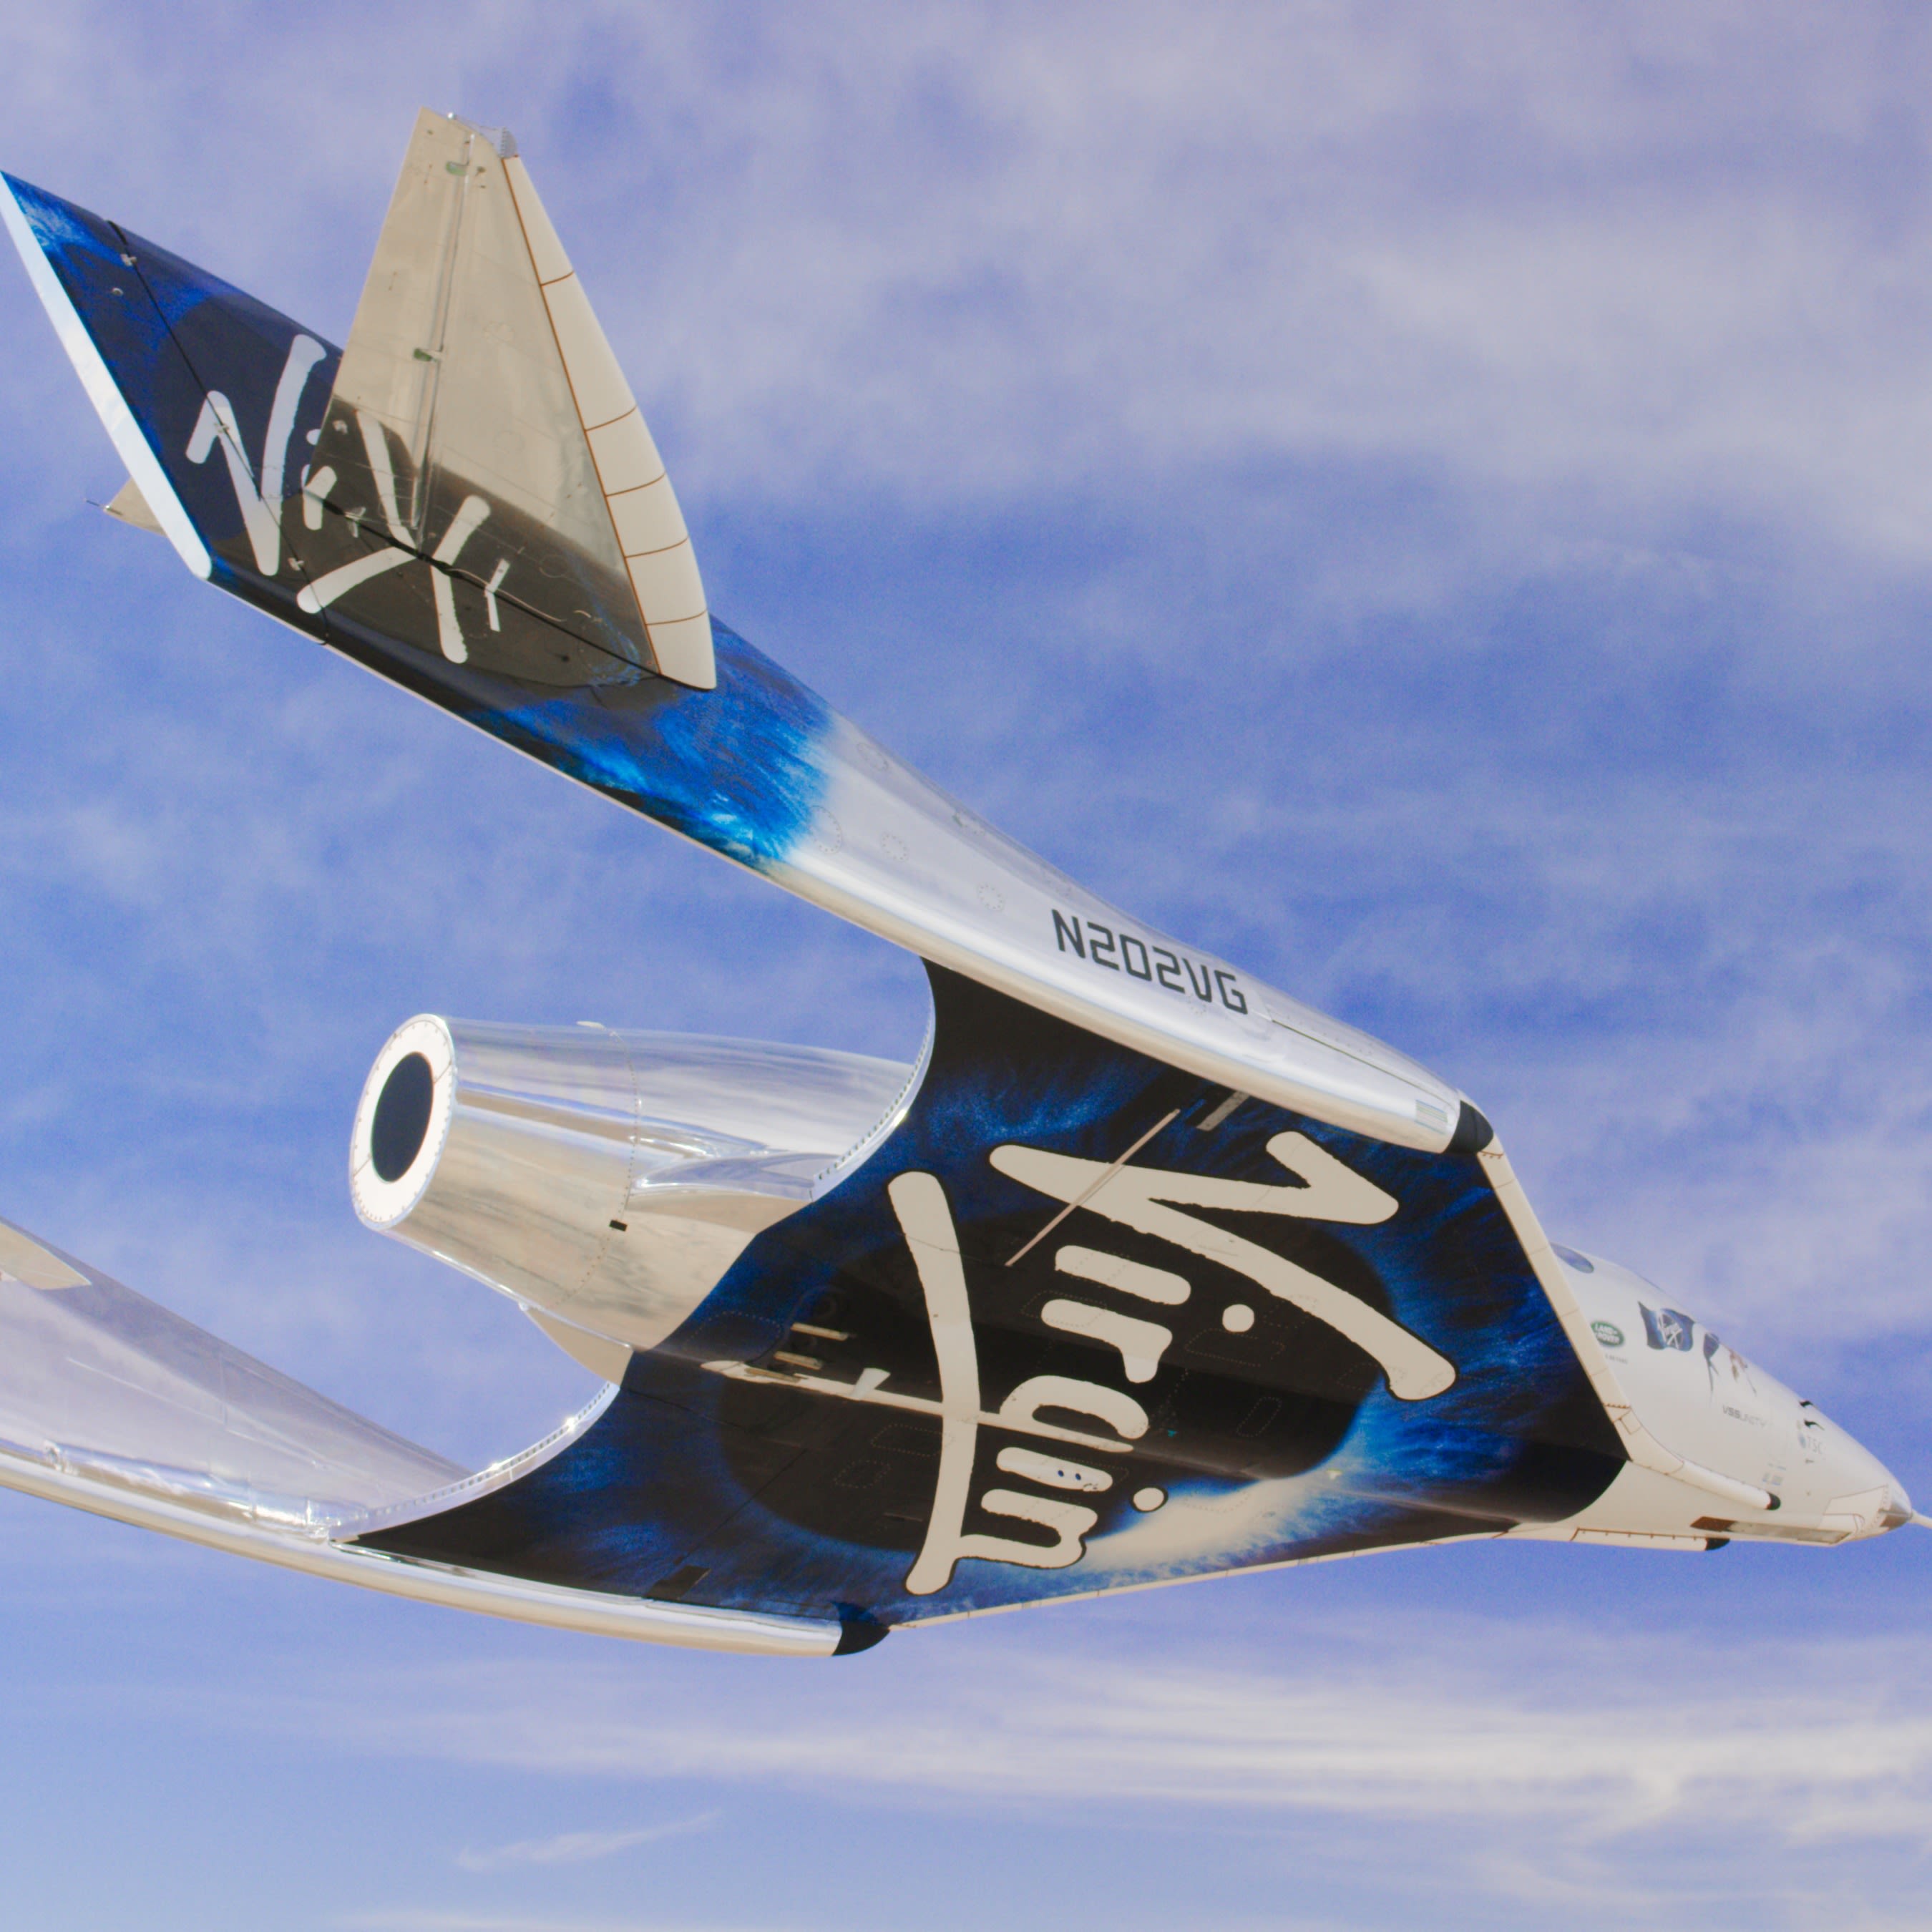 Image from Virgin Galactic